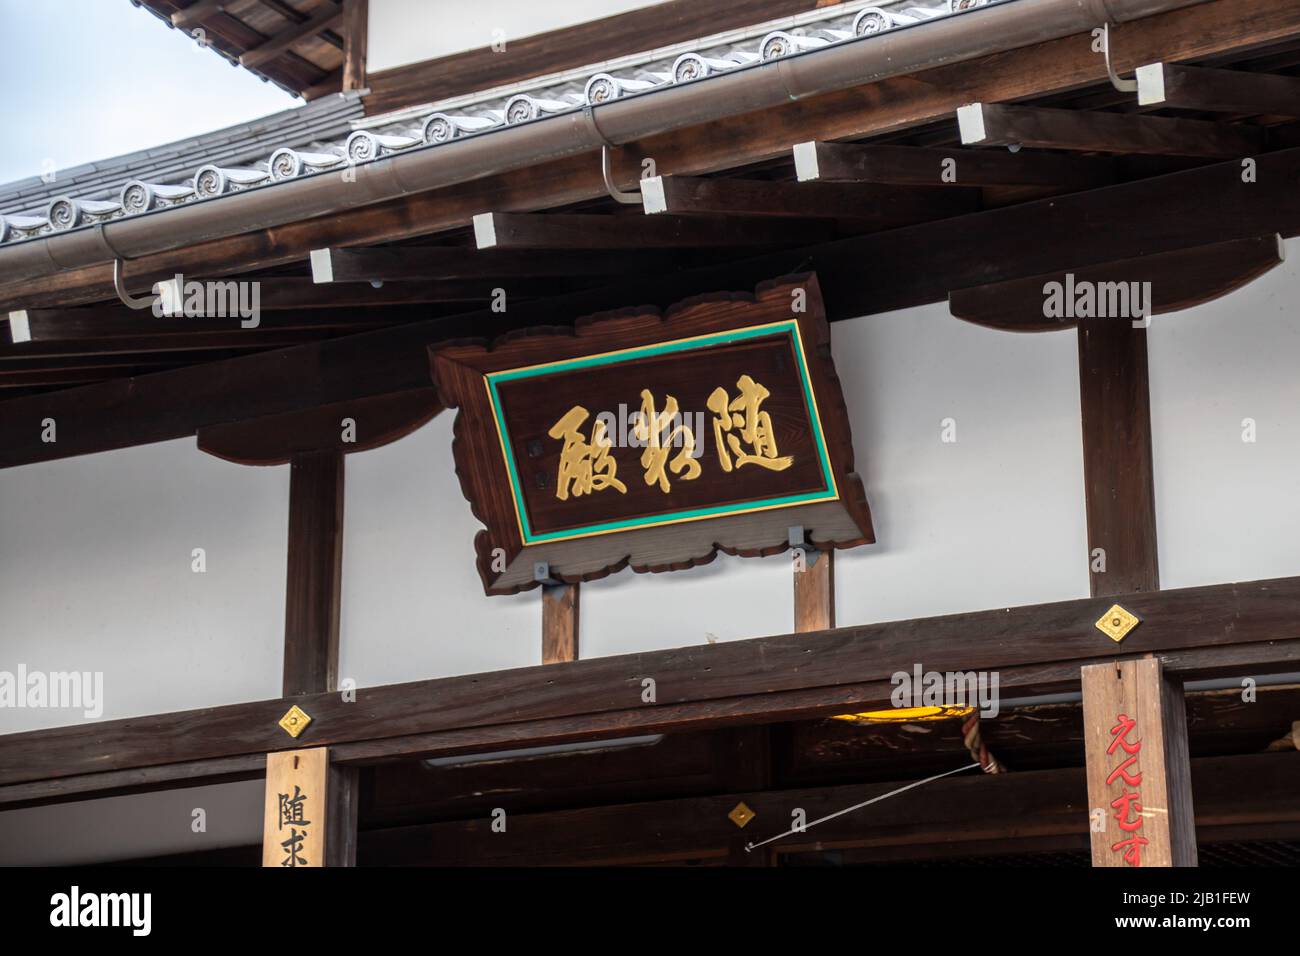 Kyoto, JAPAN - 2 Apr 2021 : The sign of Zuigu hall (Zuigudou) at Kiyomizu Temple. Famouse ”Tainai Meguri” venue can be found via a doorway in it Stock Photo